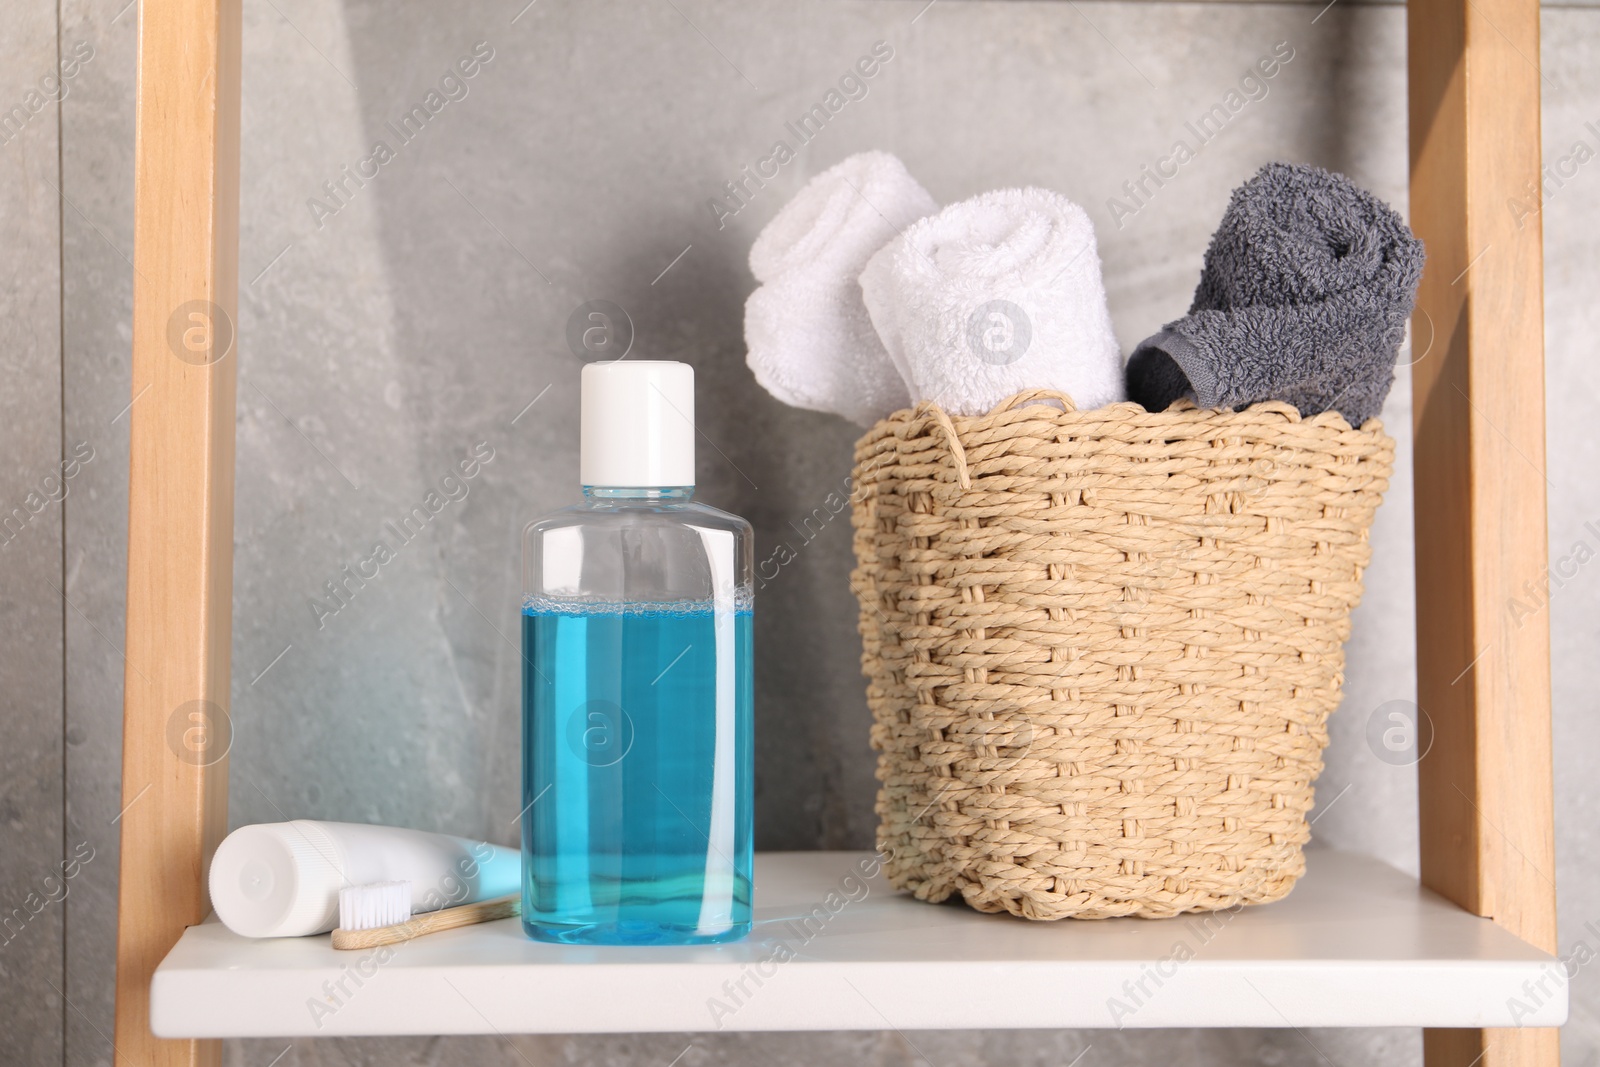 Photo of Bottle of mouthwash, toothpaste, toothbrush and towels on shelf in bathroom